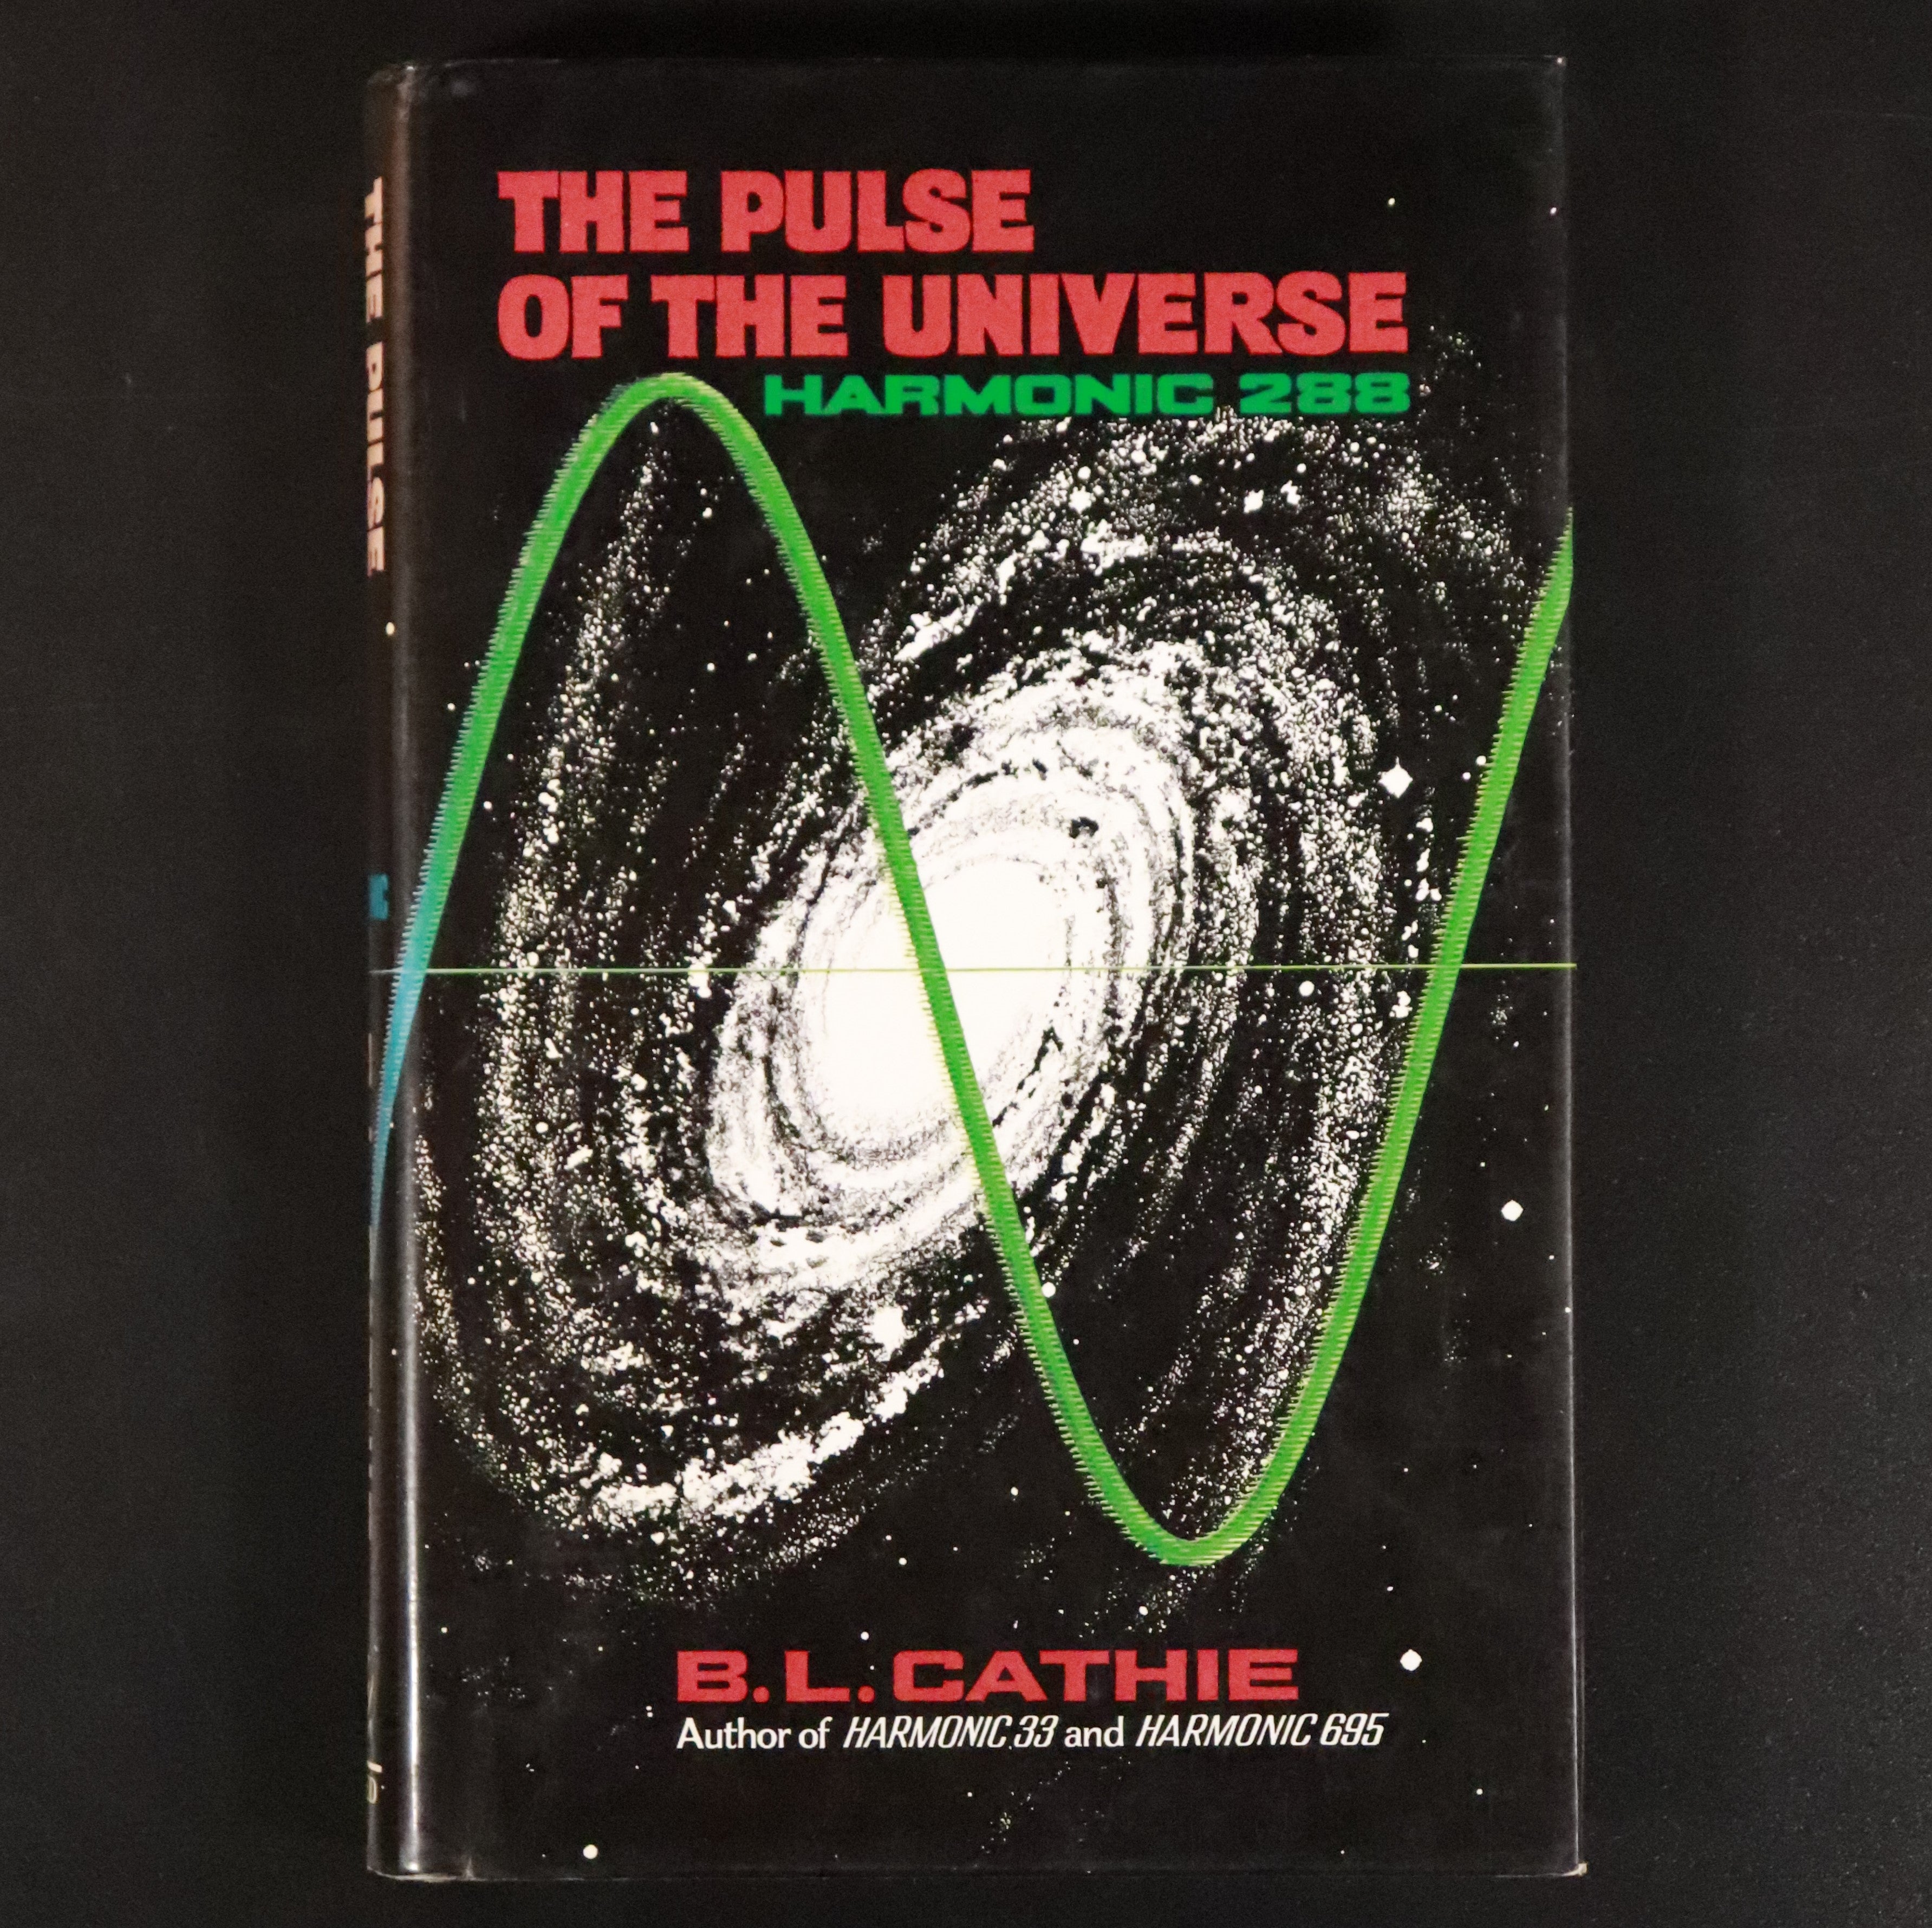 1977 The Pulse Of The Universe by Bruce Cathie 1st Edition Science UFO Book